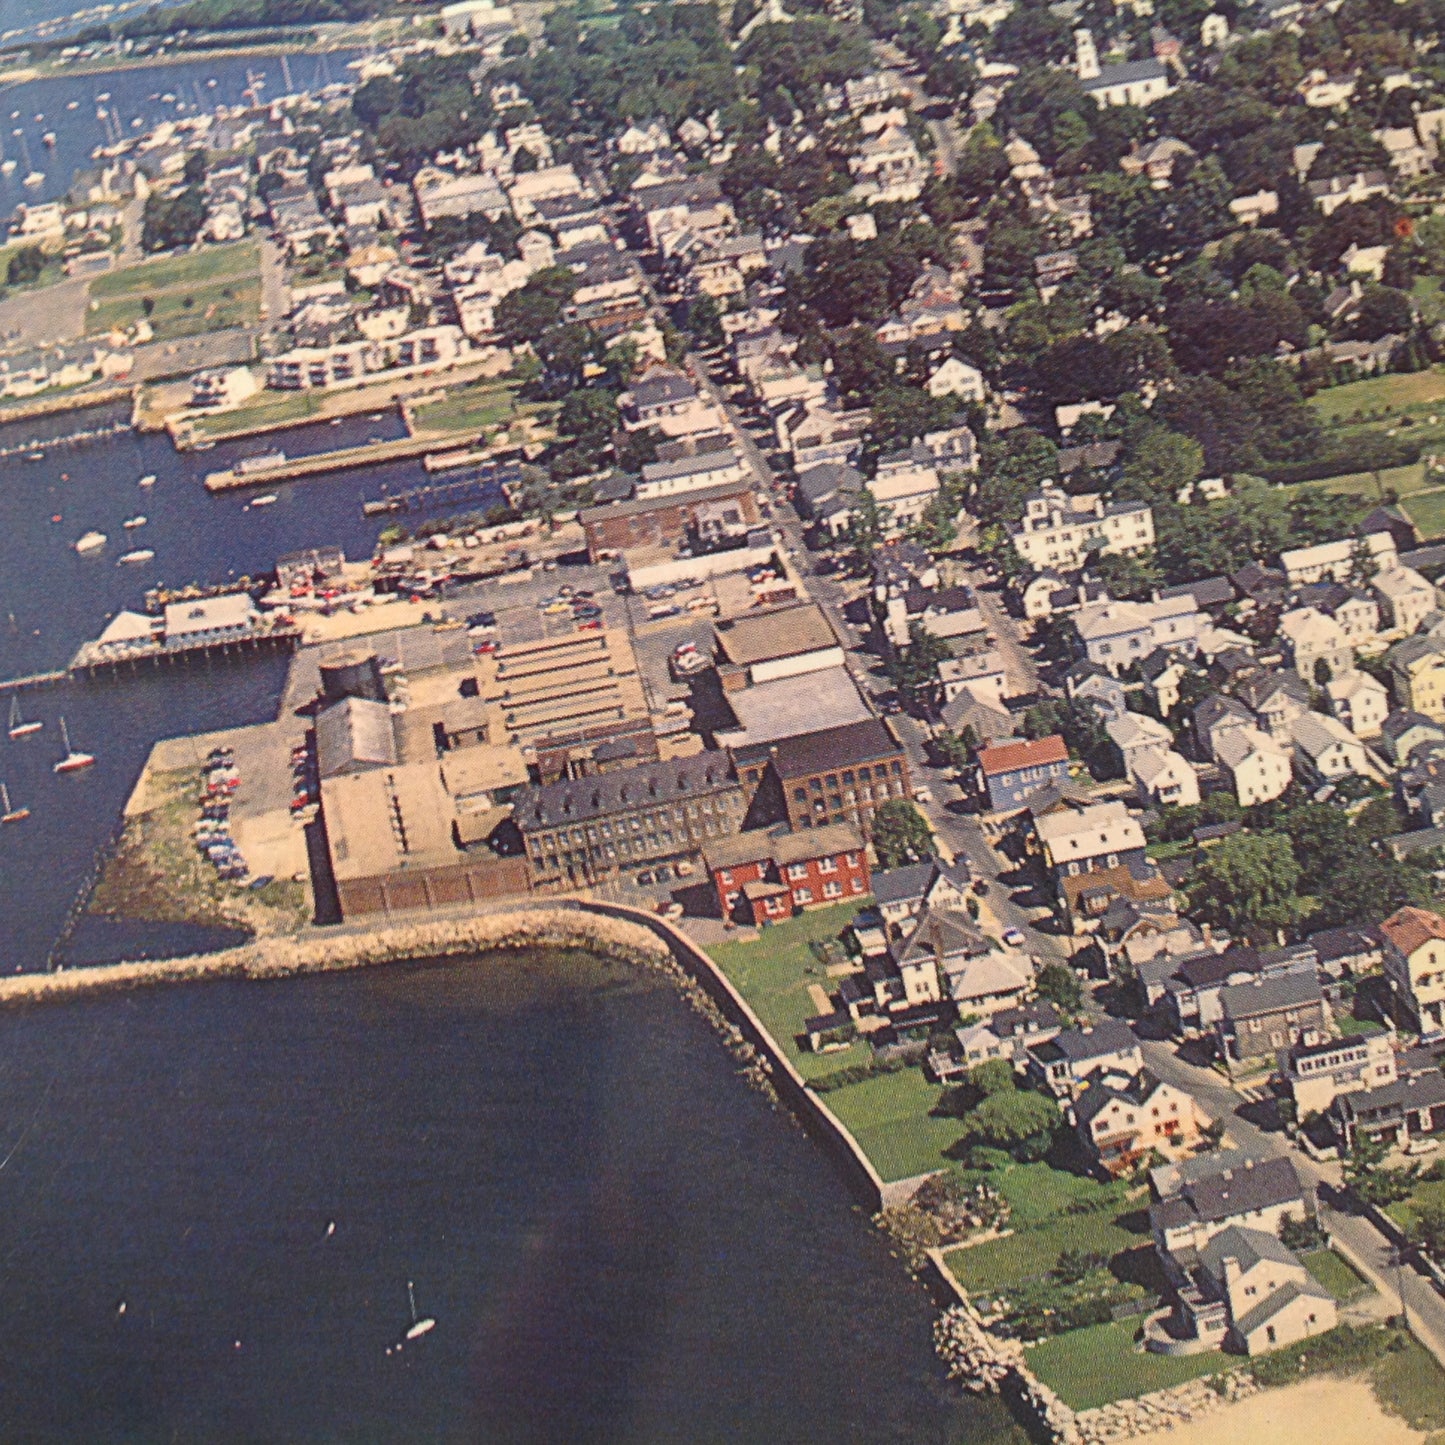 Vintage Book & Tackle Shop Color Postcard Aerial View Stonington and Vicinity Connecticut